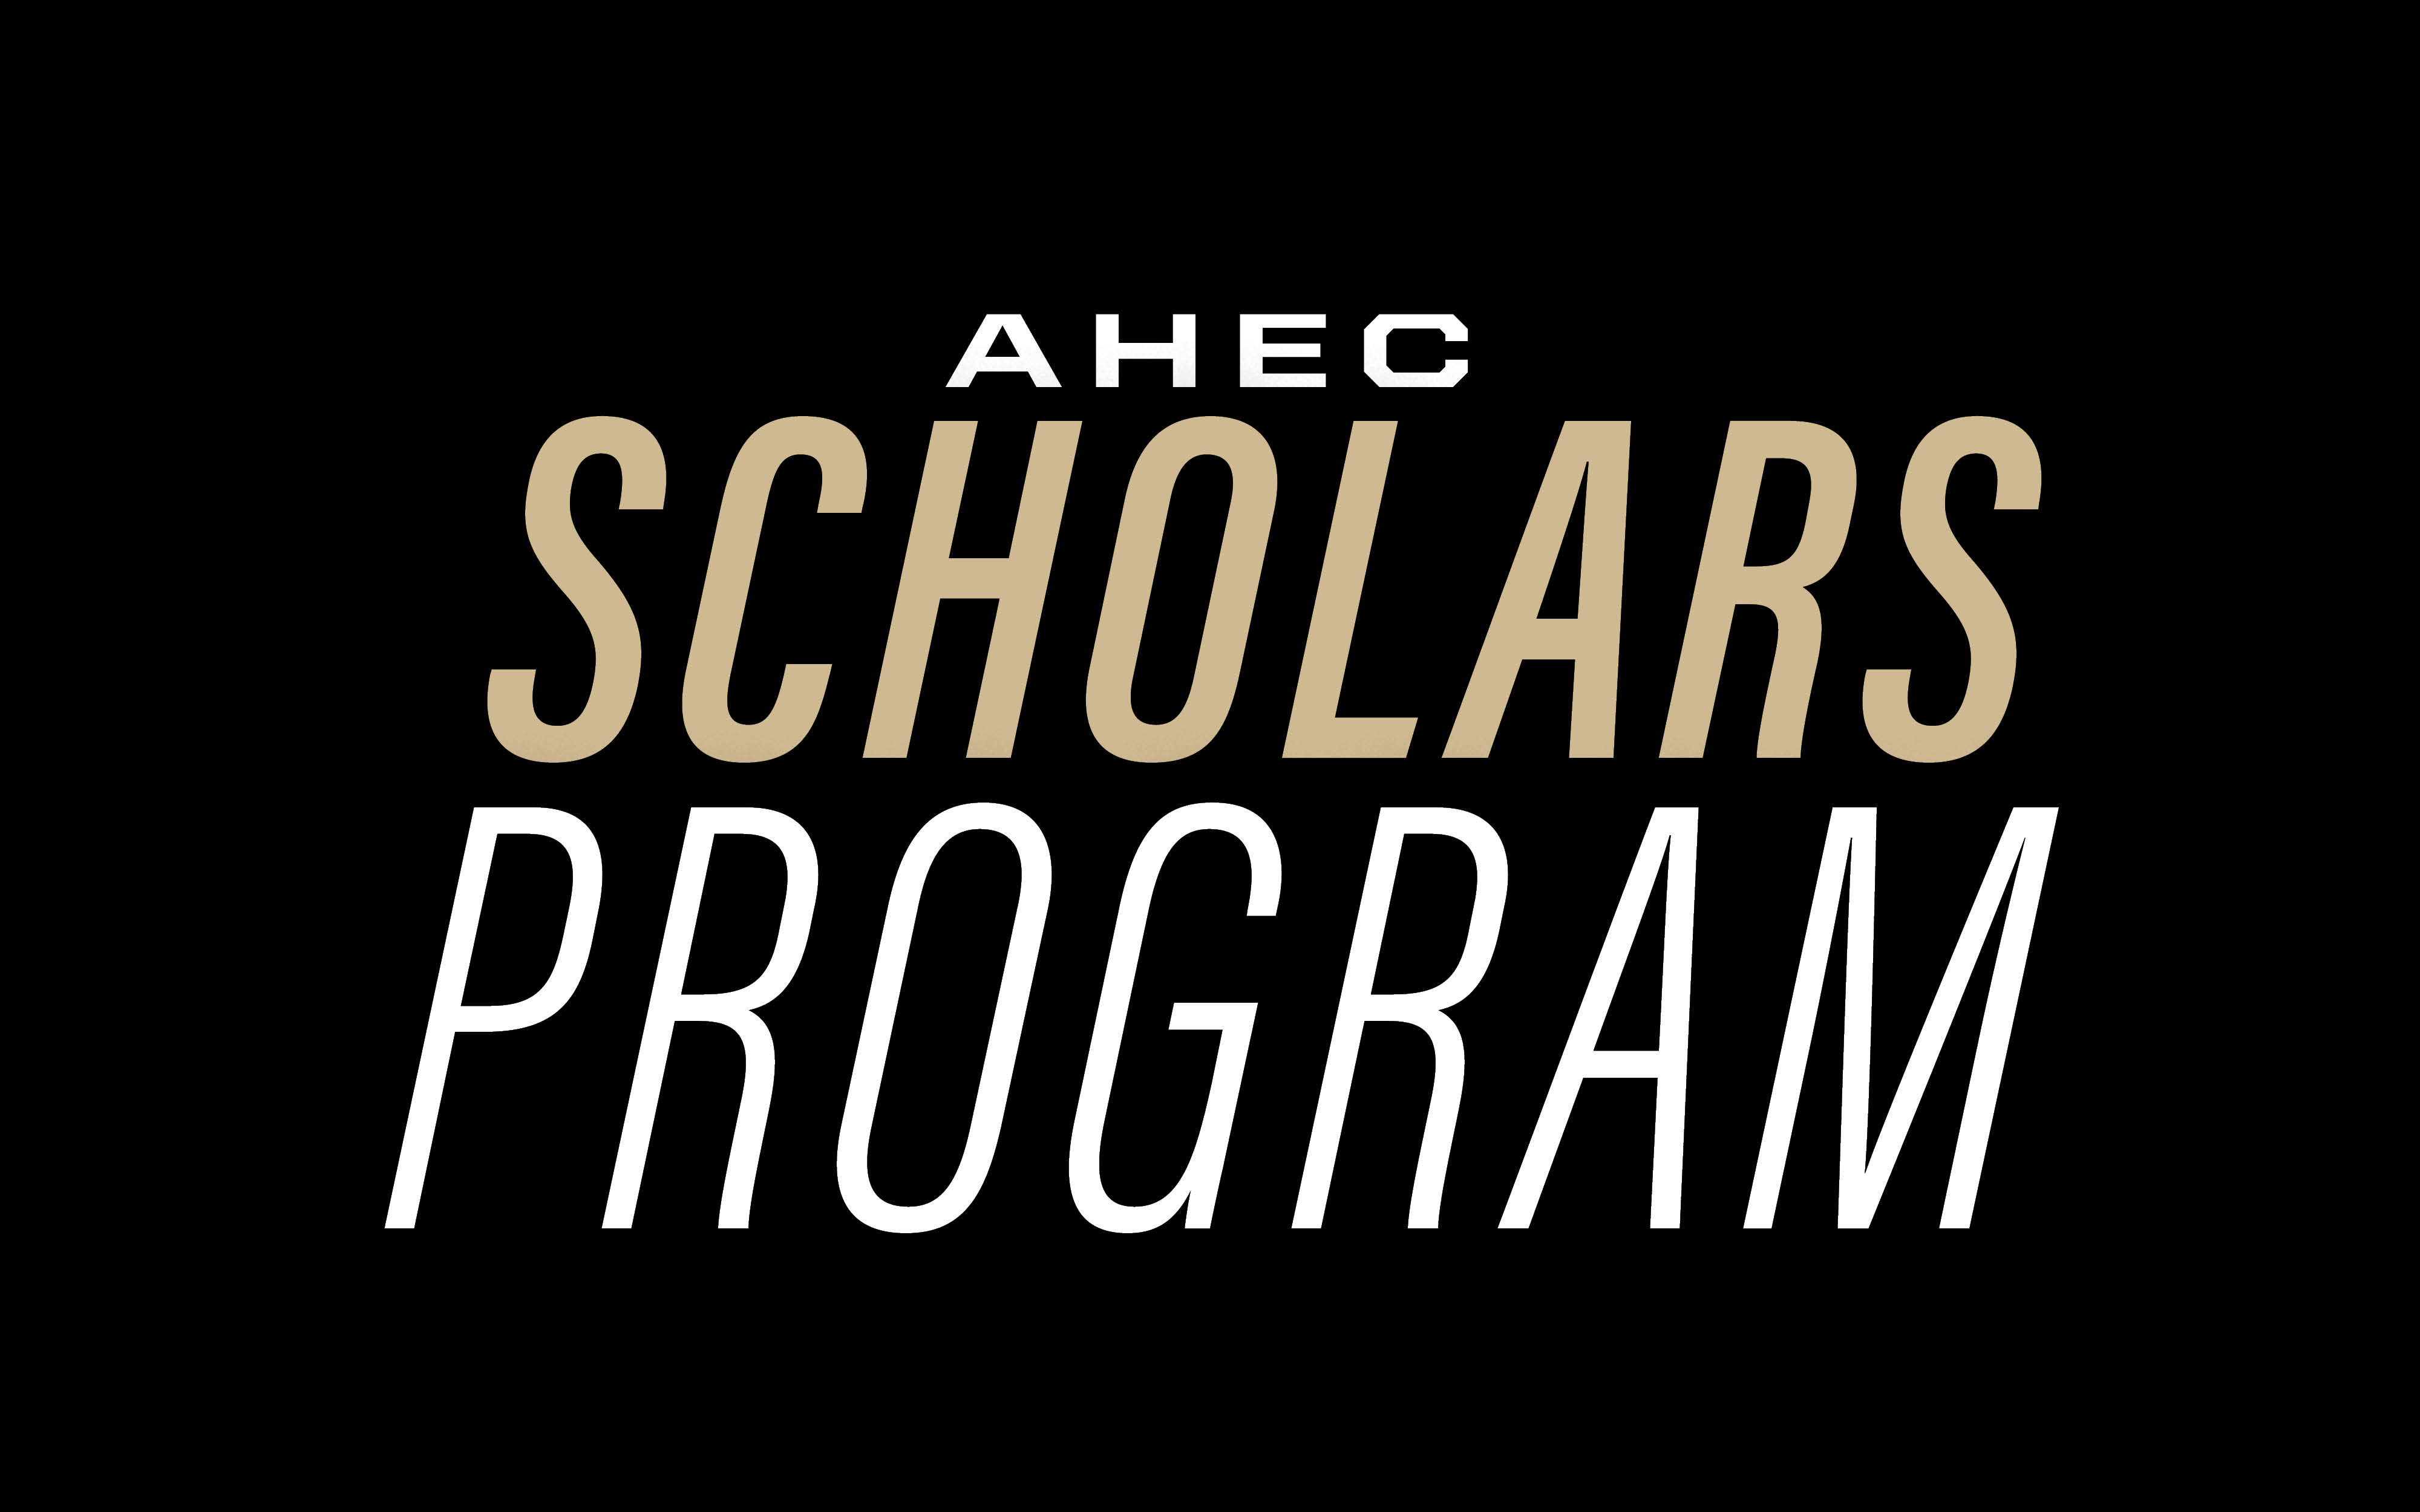 Black graphic with white and gold letters that read "AHEC Scholars Program."